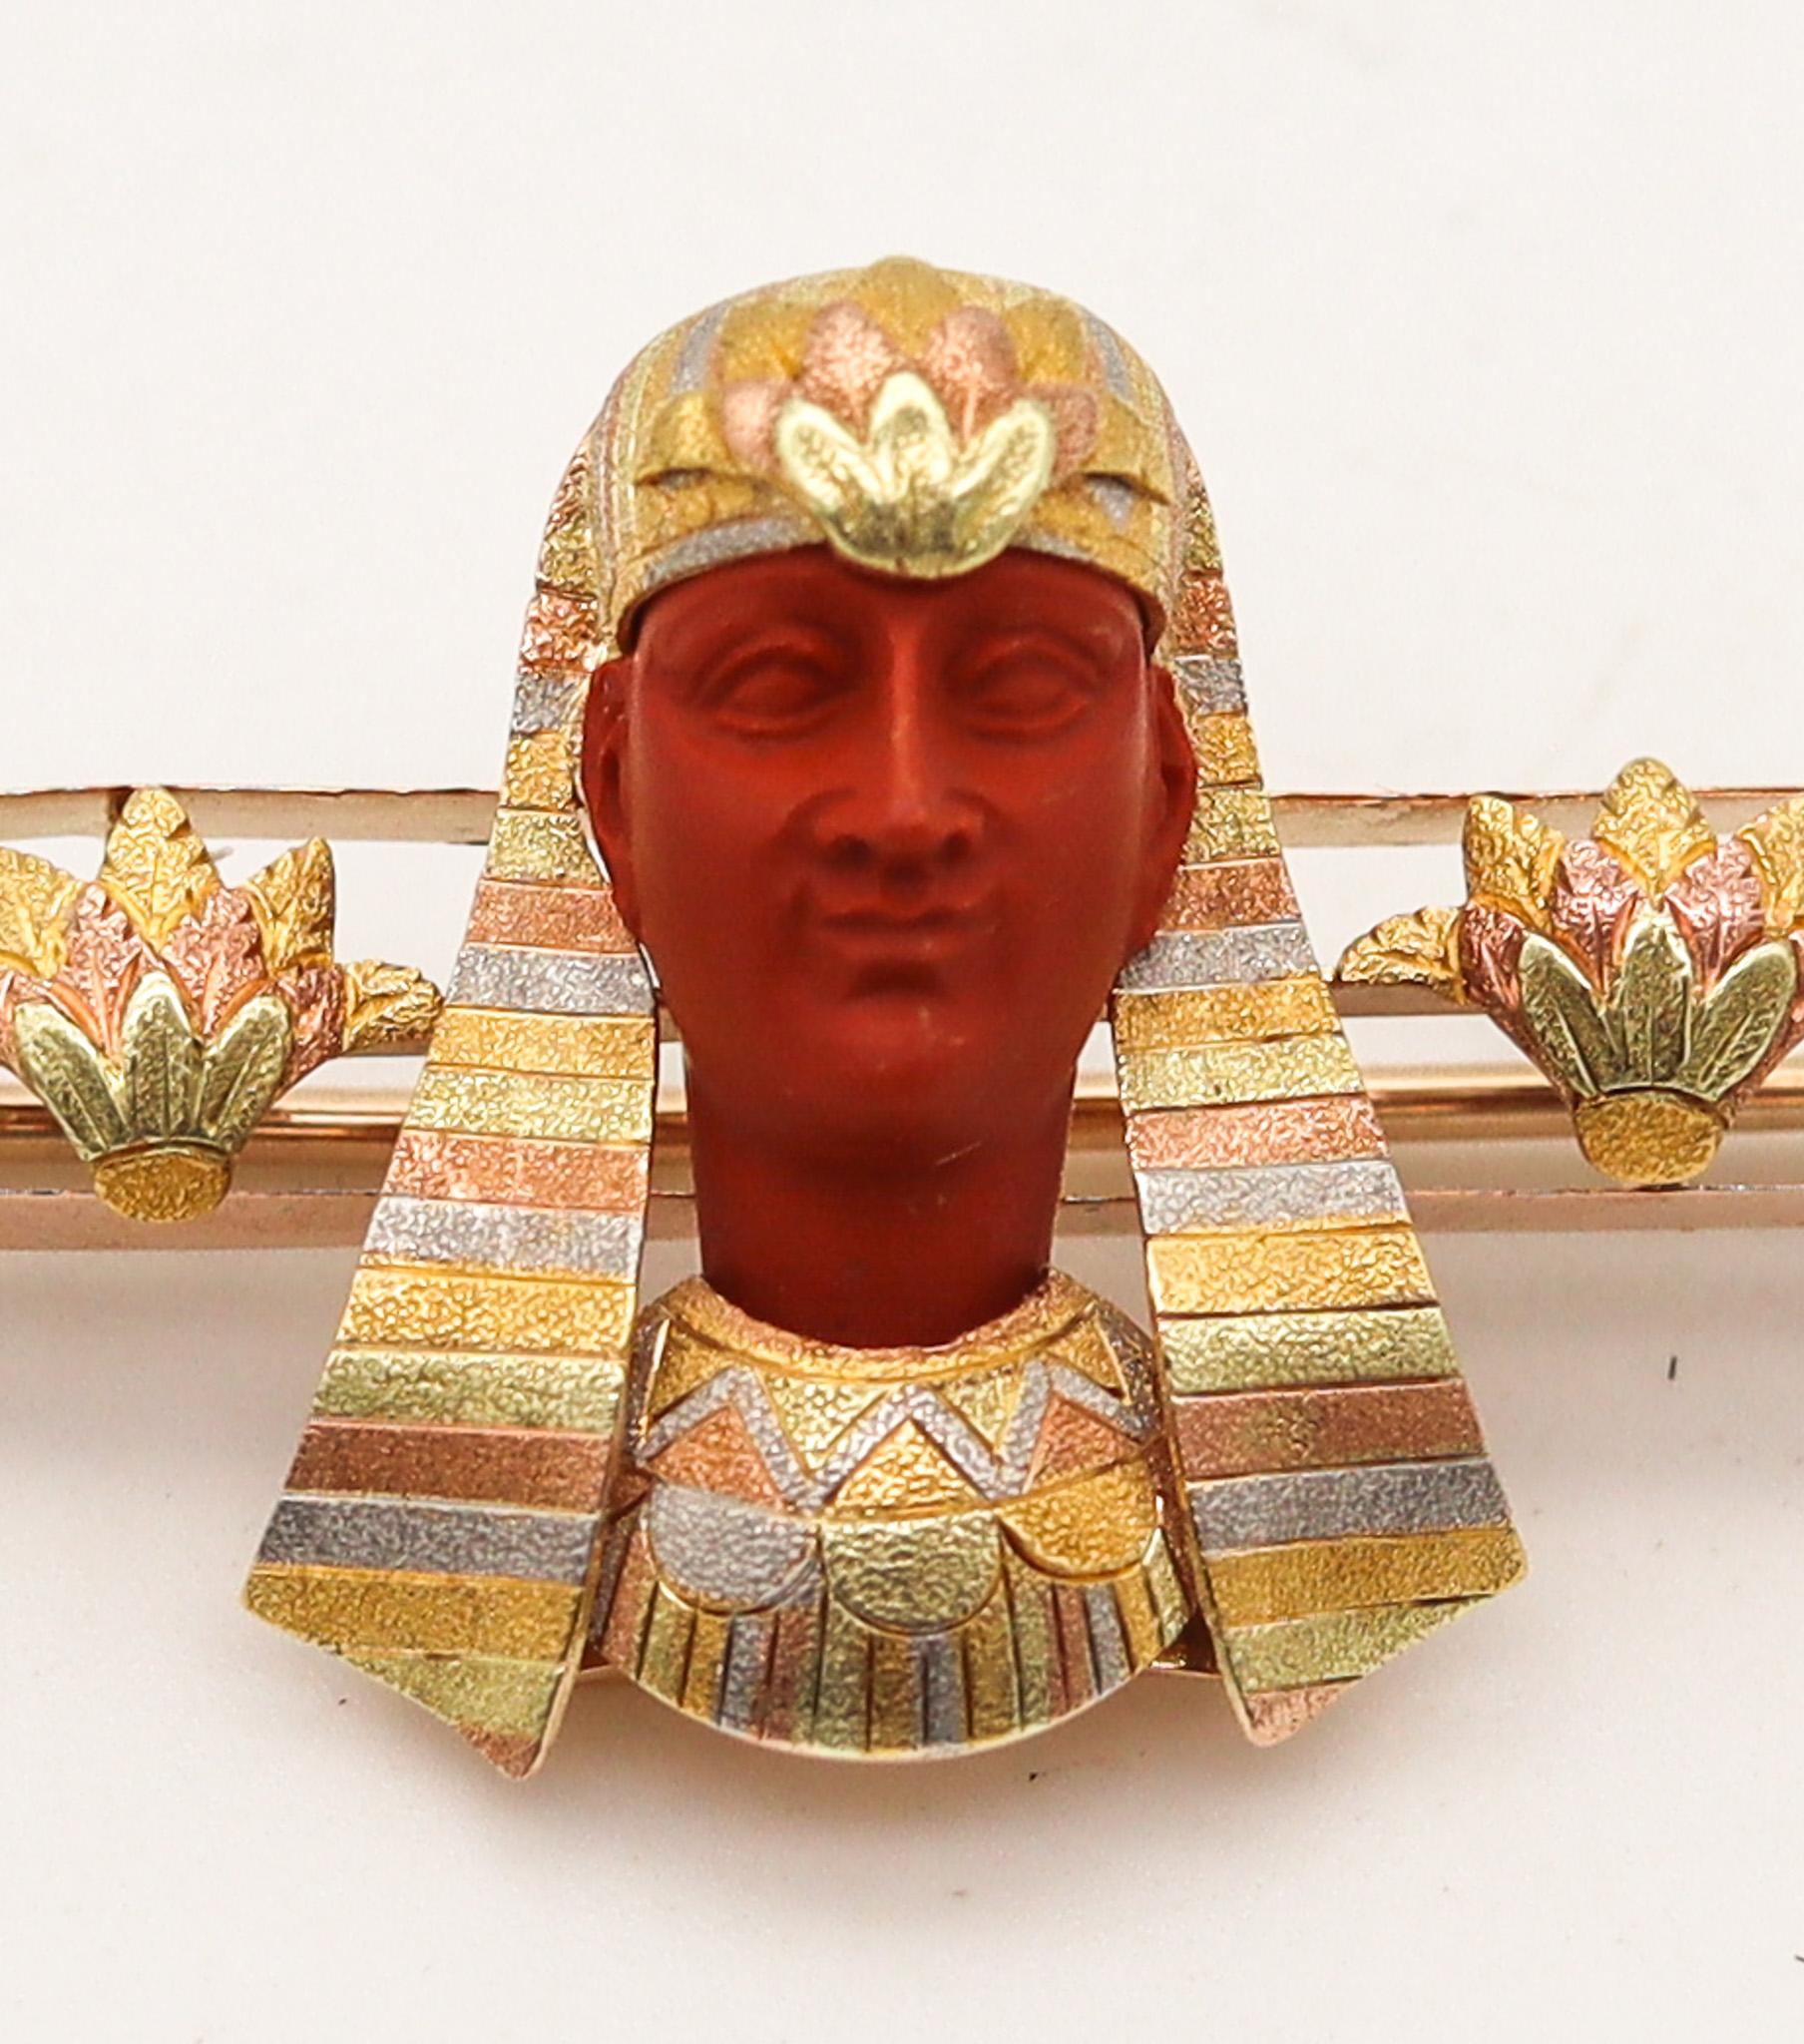 Birks 1890 Egyptian Revival Brooch 14K Gold With Pharaoh Bust Carved In Jasper In Excellent Condition For Sale In Miami, FL